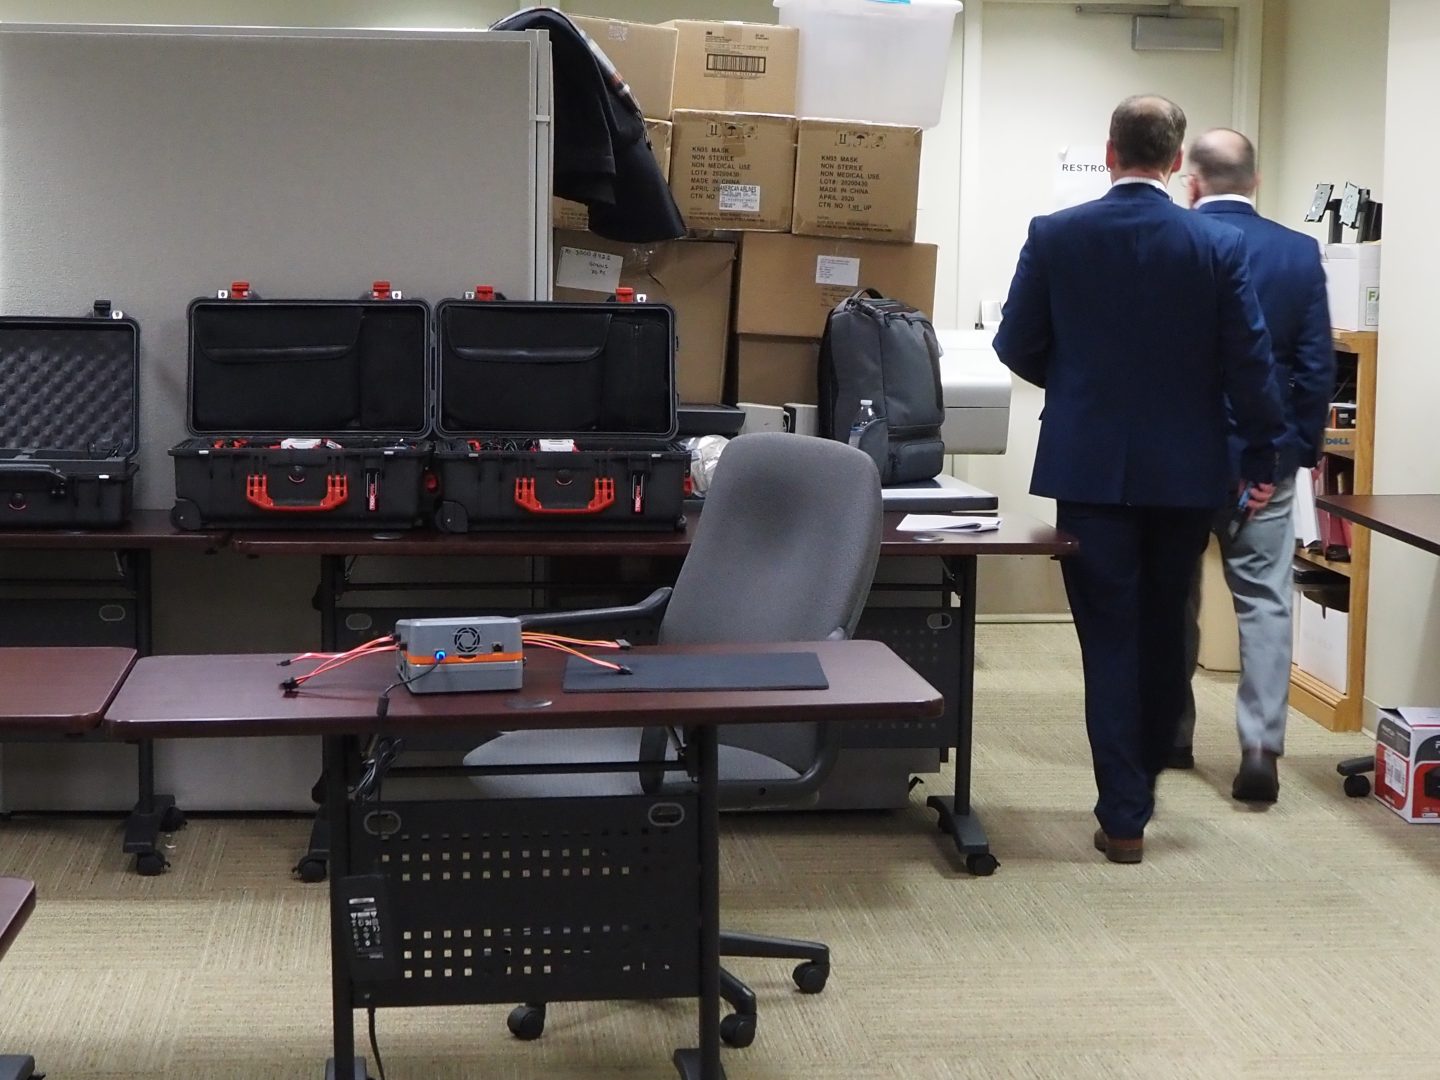 Officials walk past unidentified equipment purportedly to be used in an inspection of Fulton County's voting machines on Jan. 14, 2022. The inspection did not proceed as planned after the Pa. Supreme Court ordered a halt.